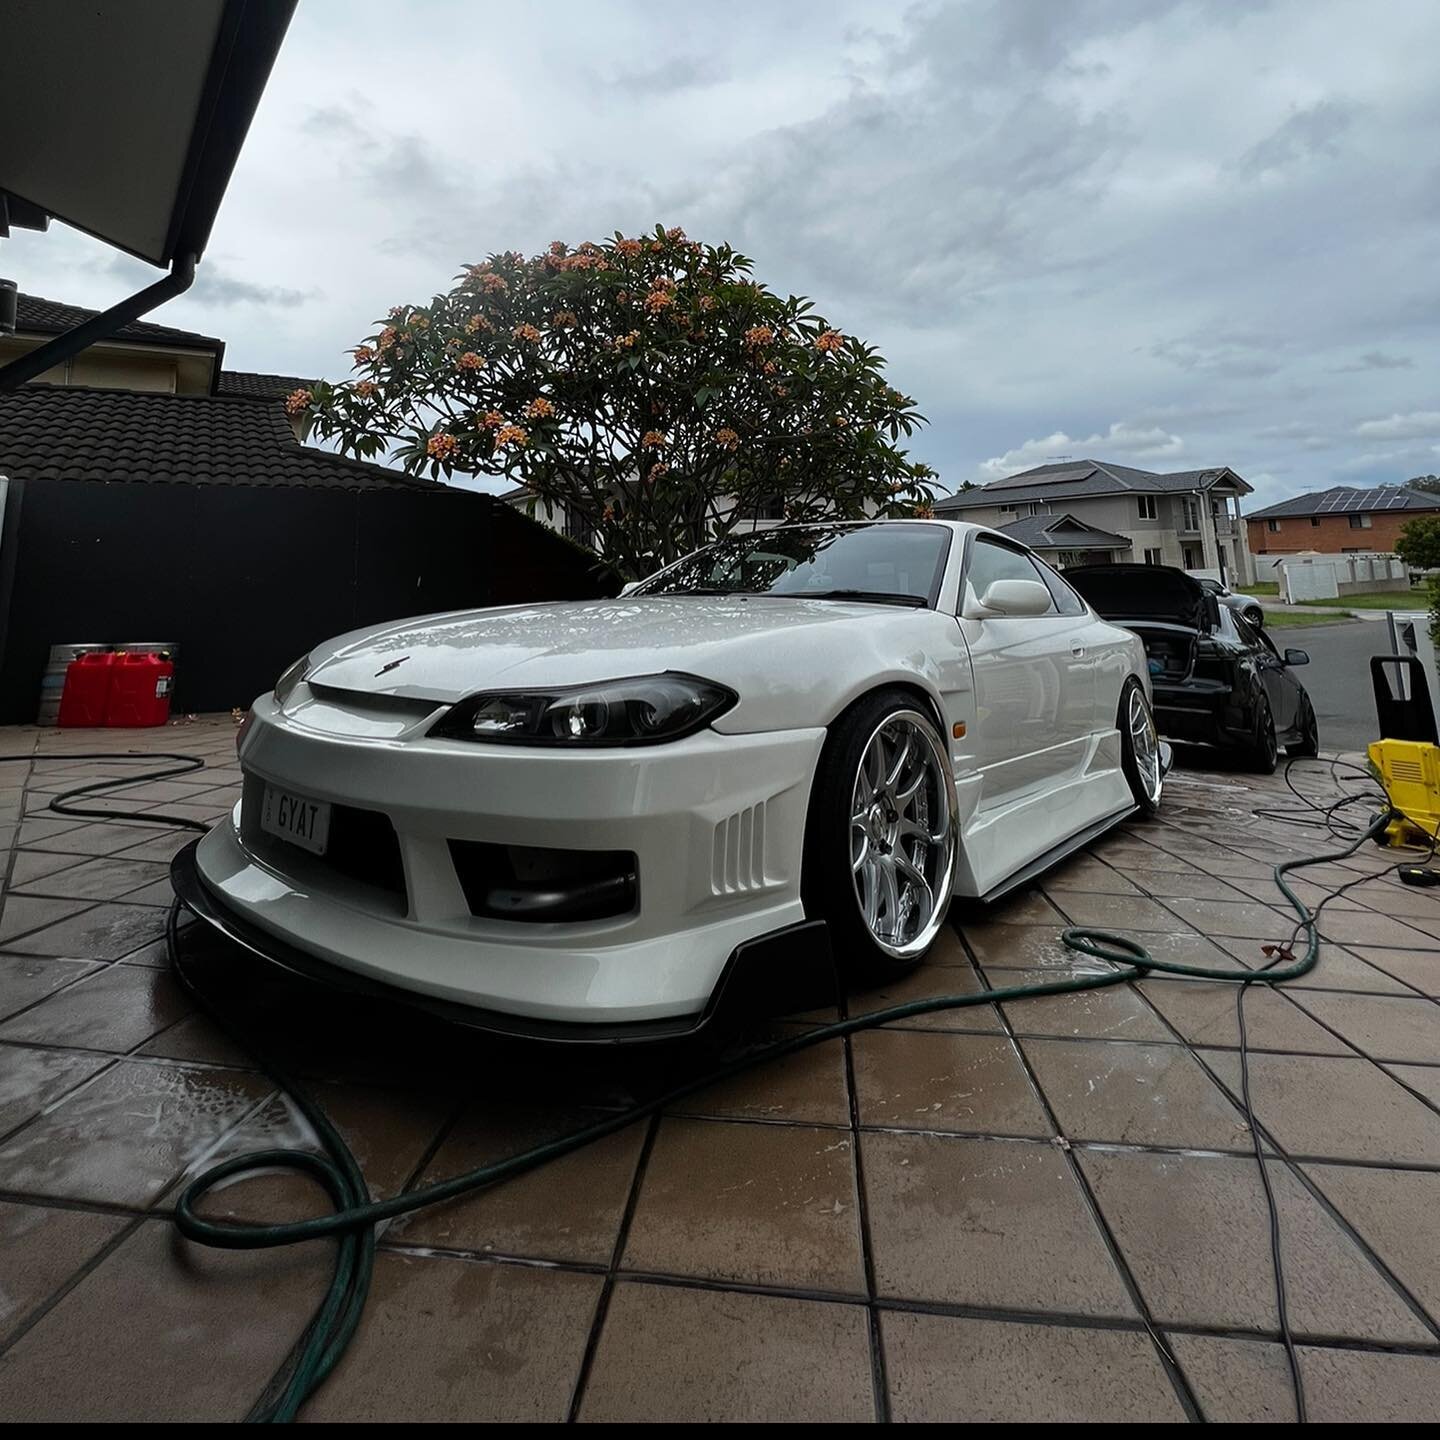 2000 Nissan Silvia S15!

@gyat_15 gave me a message to get his beautiful S15 ready for a car show the following day

An exterior detail was requested and managed to get it into tip top shape 

Enquire now about getting your car the love it deserves!
